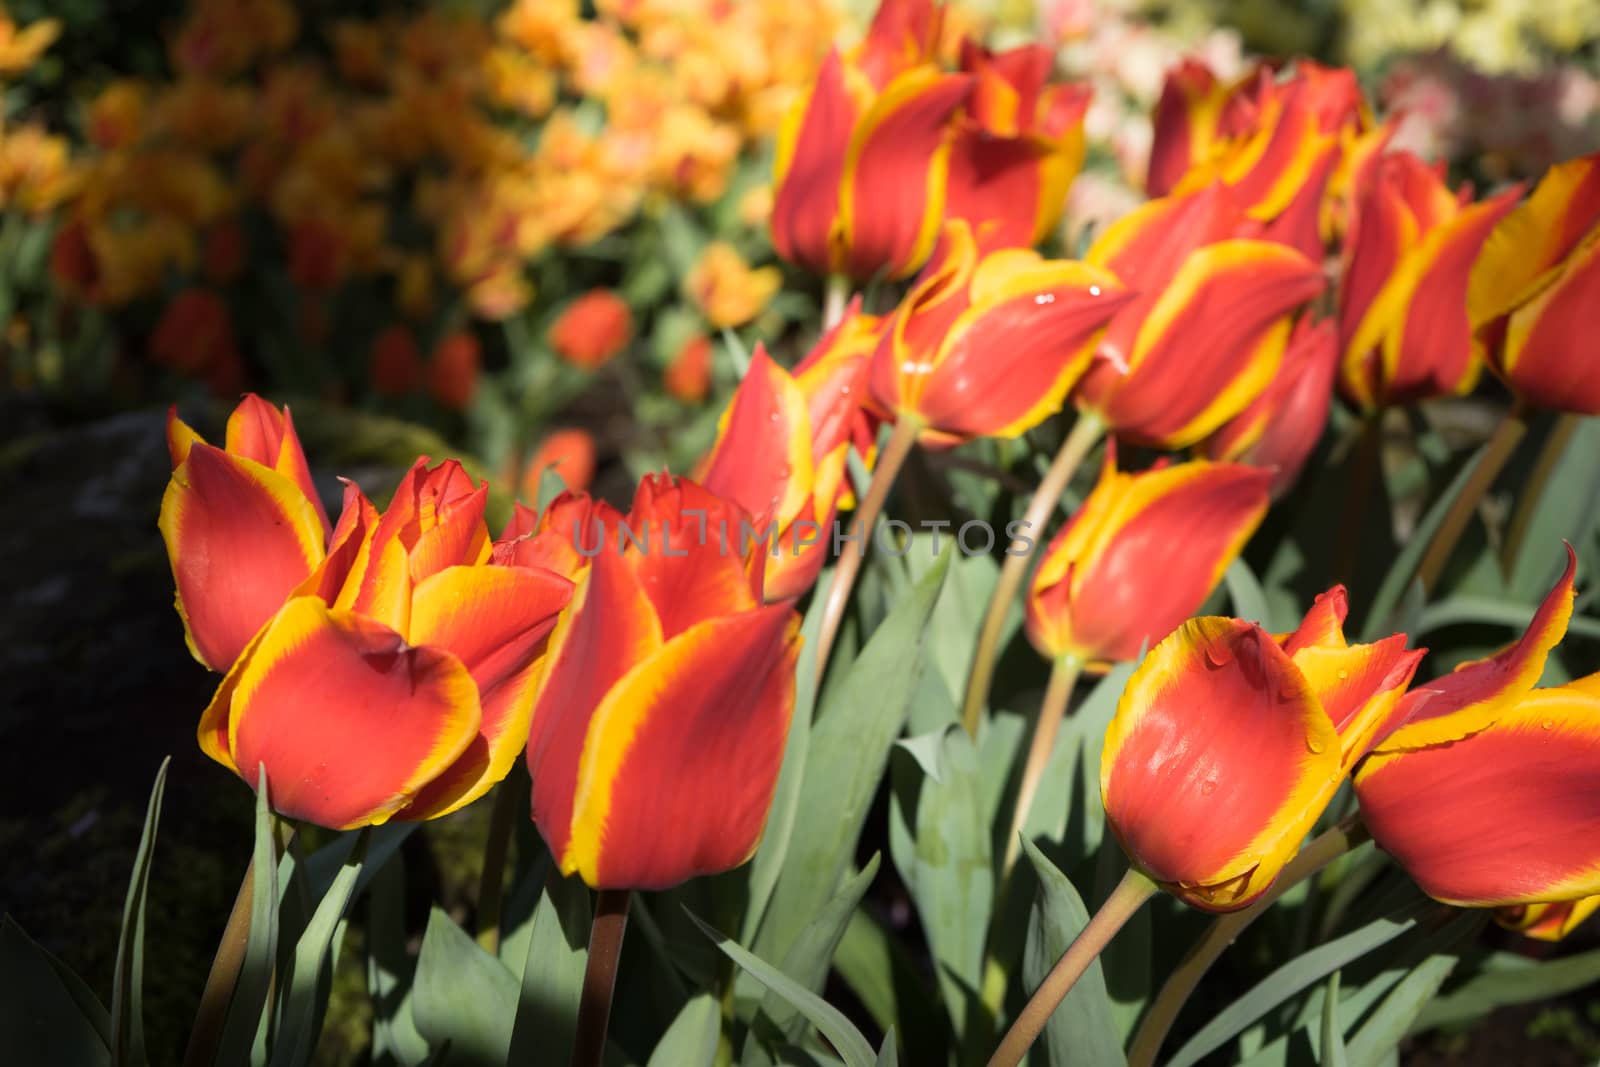 Red and yellow tulips in a garden in Lisse, Netherlands, Europe by ramana16